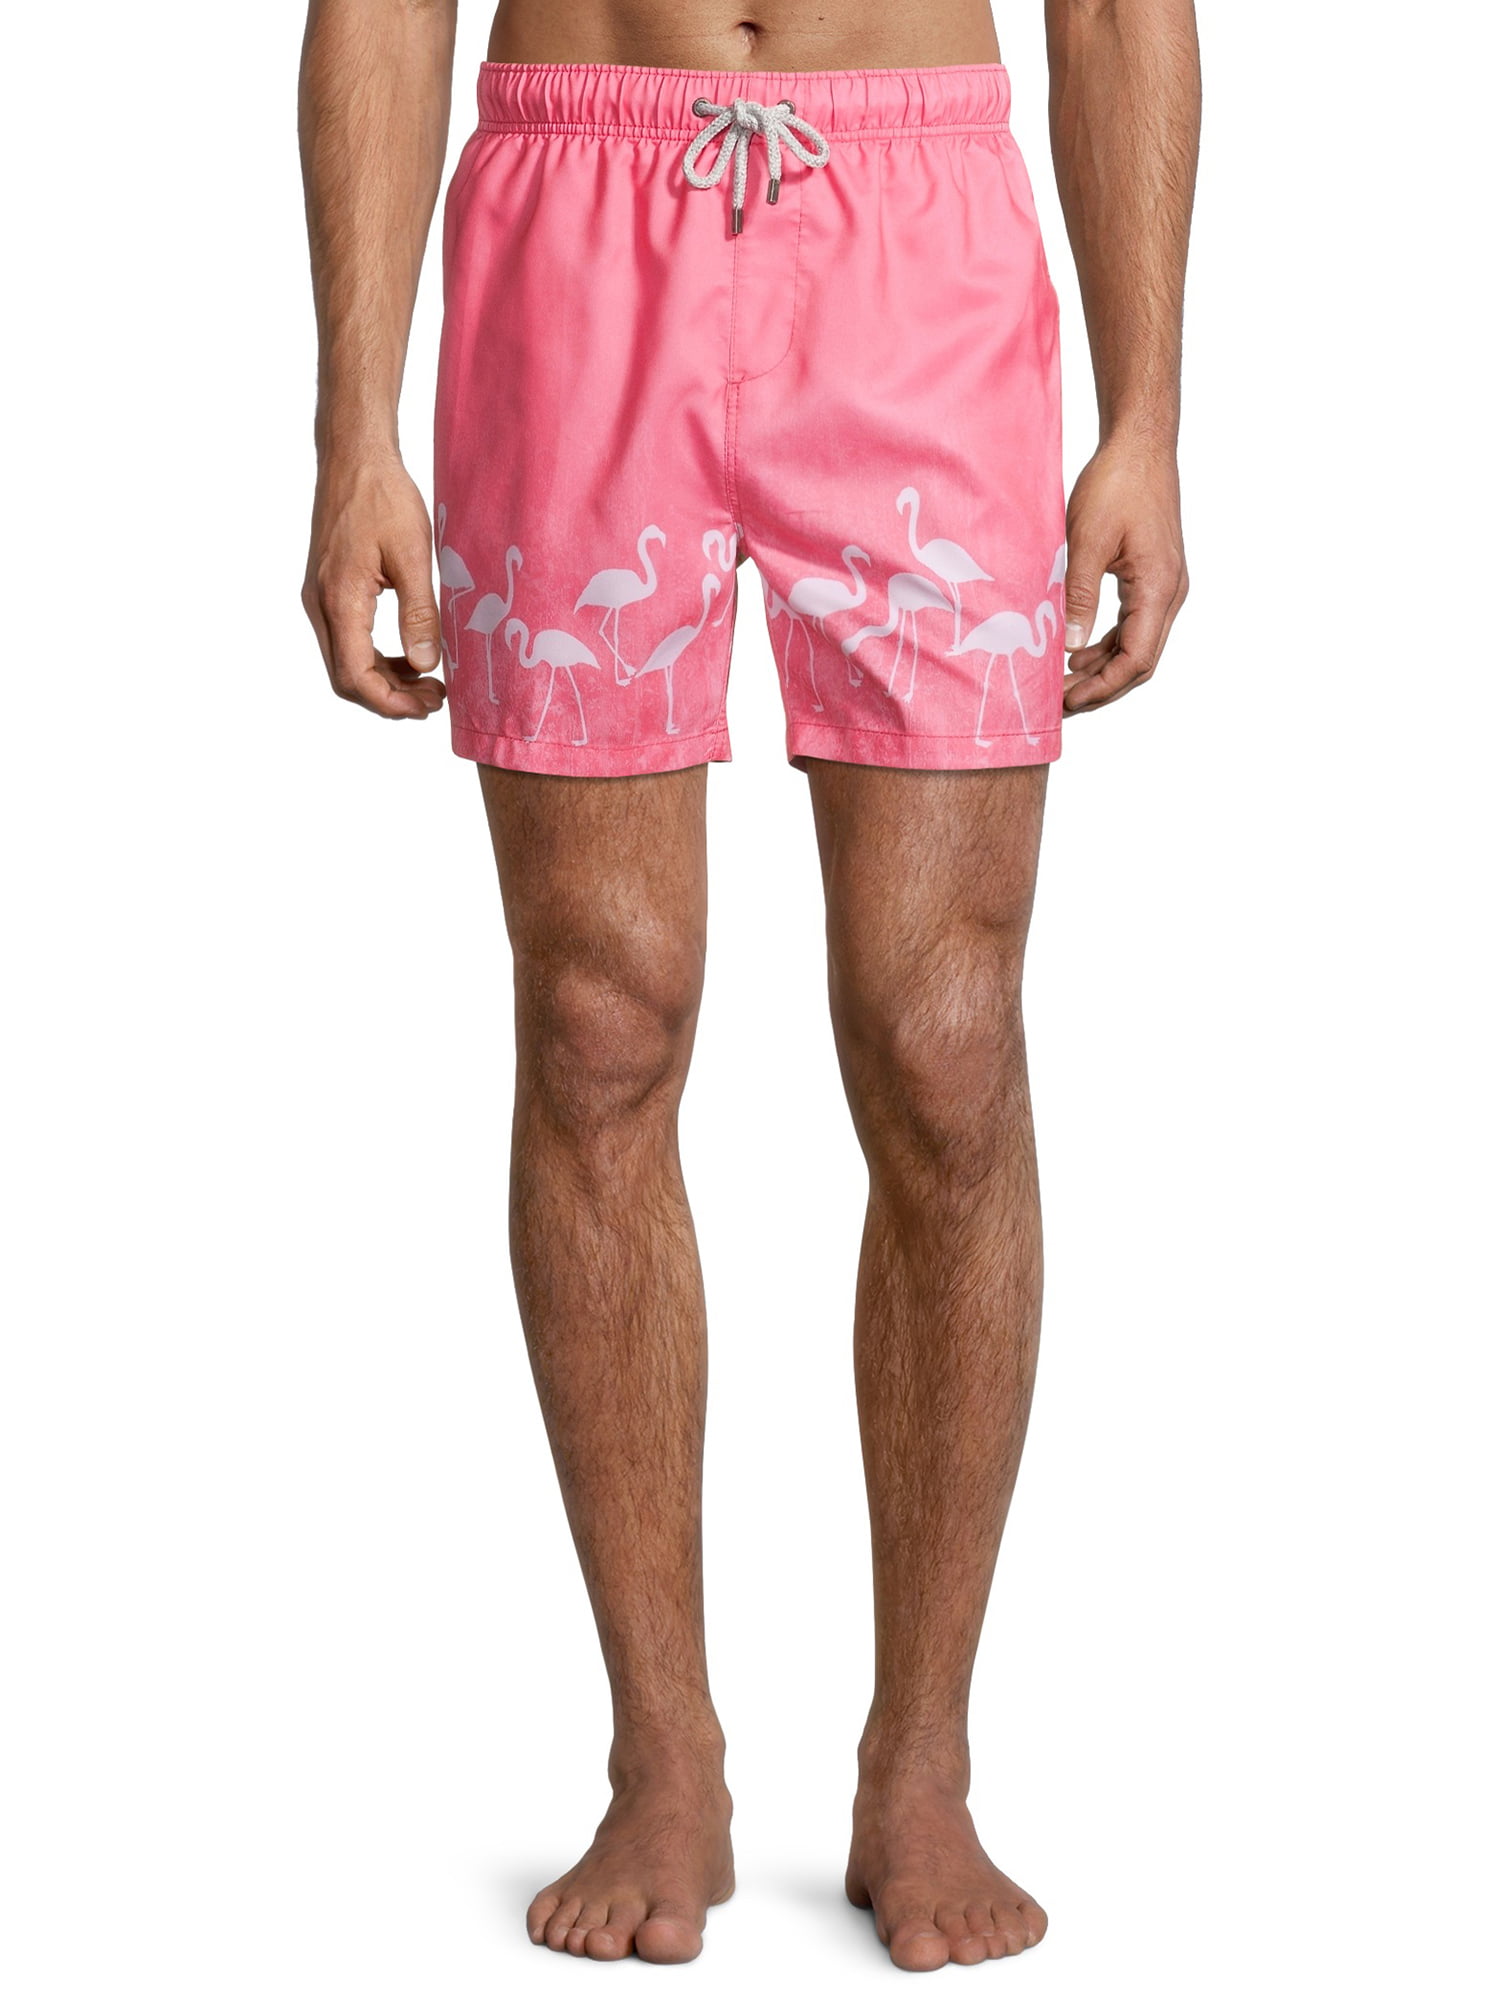 Wexzss Flower Pink Flamingo Funny Summer Quick-Drying Swim Trunks Beach Shorts Cargo Shorts 